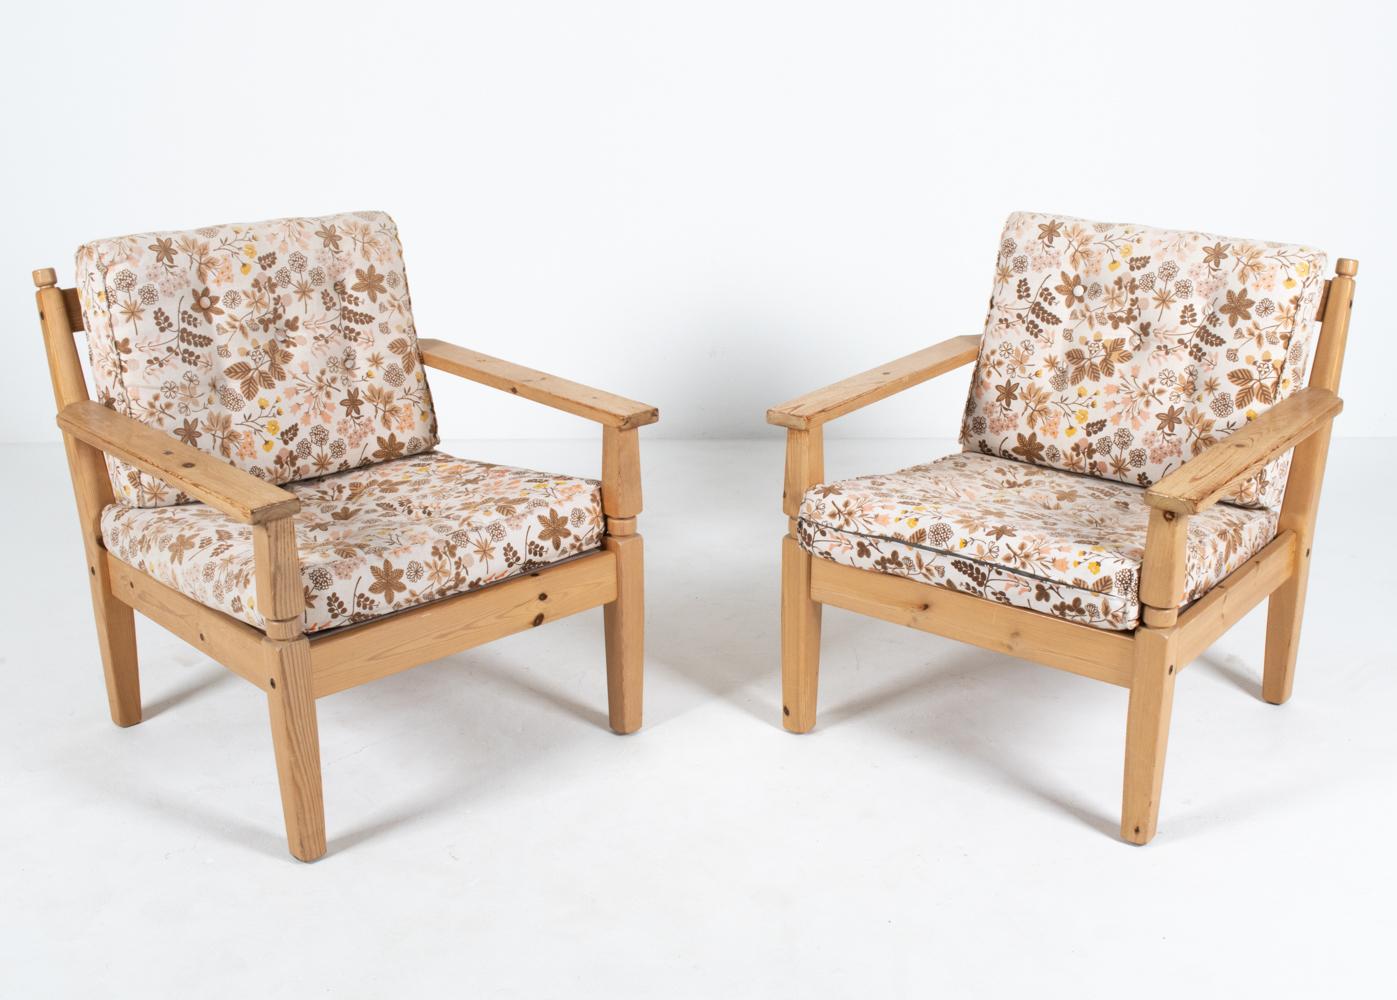 An unusual and desirable marriage of Scandinavian Brutalist and Provincial farmhouse design, these Danish lounge chairs boast frames of solid pine with flat paddle arms and minimal turnings, an unusual medley of aesthetics, lending these chairs a